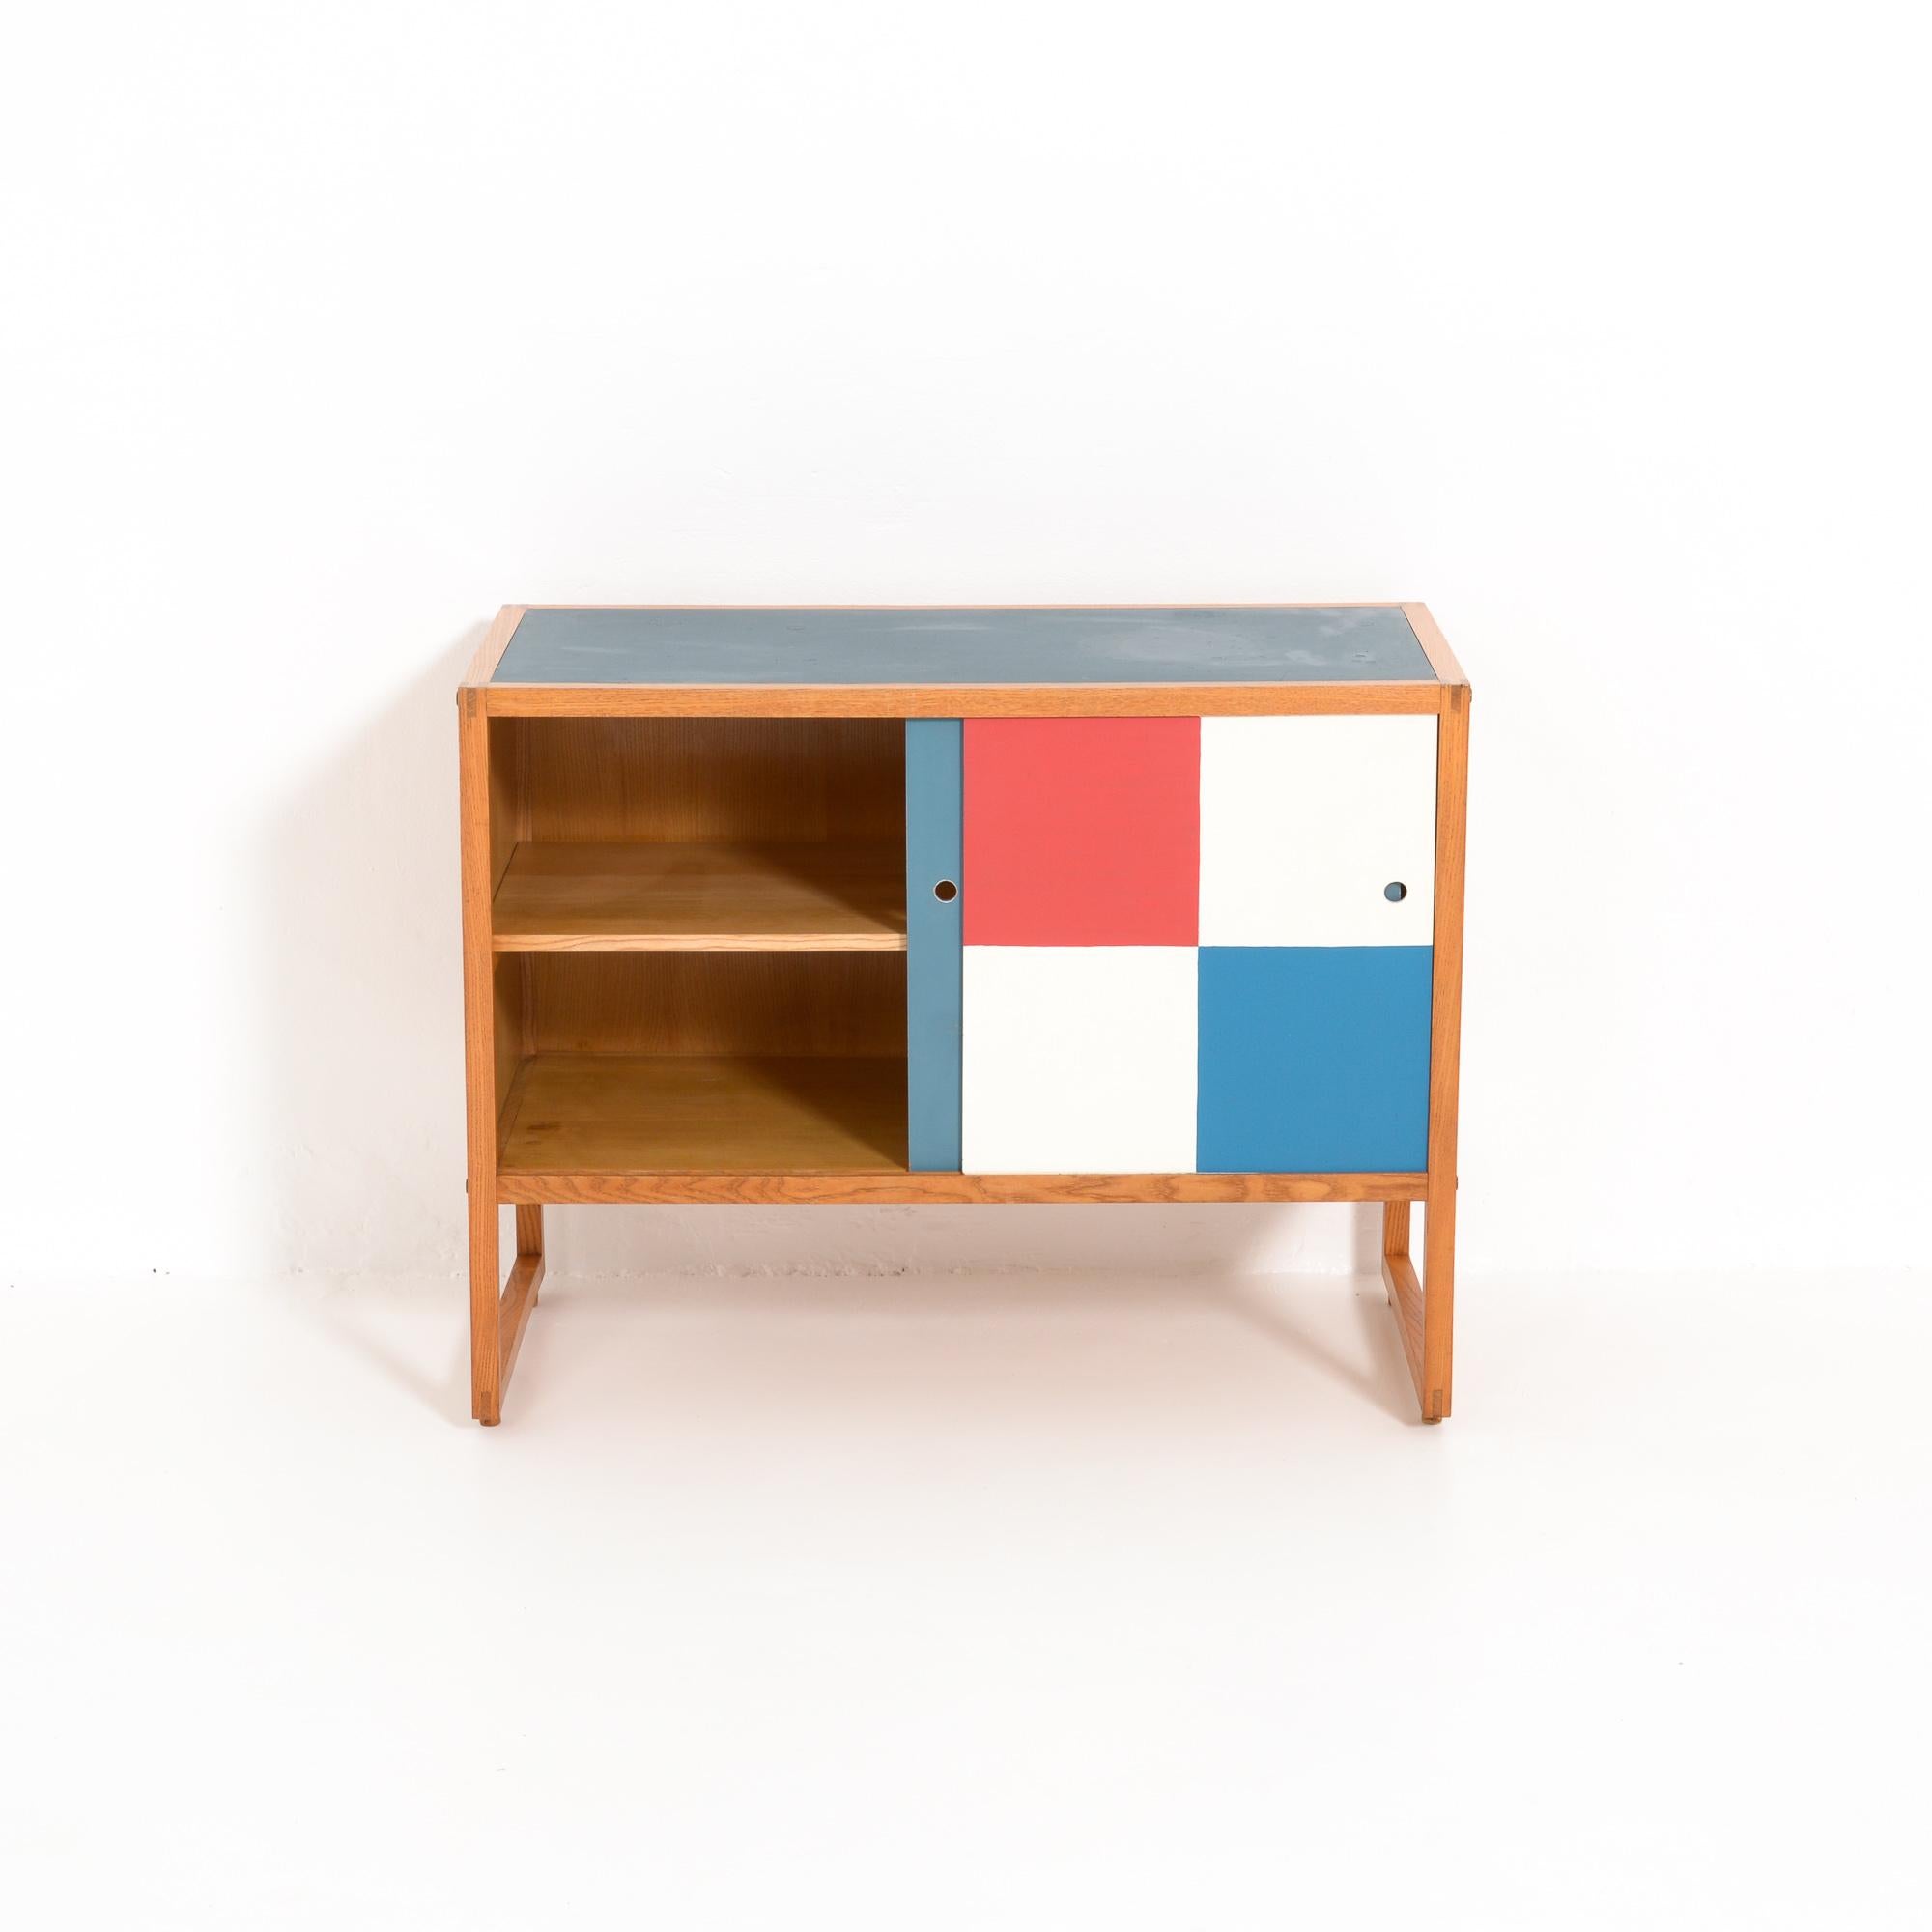 This cabinet was designed by Pieter De Bruyne in 1957 and manufactured in 1958.
Characteristic of De Bruyne’s work is the pure design with an eye for detail.
This cabinet is made of ash wood with a blue linoleum top. The two colorful sliding doors